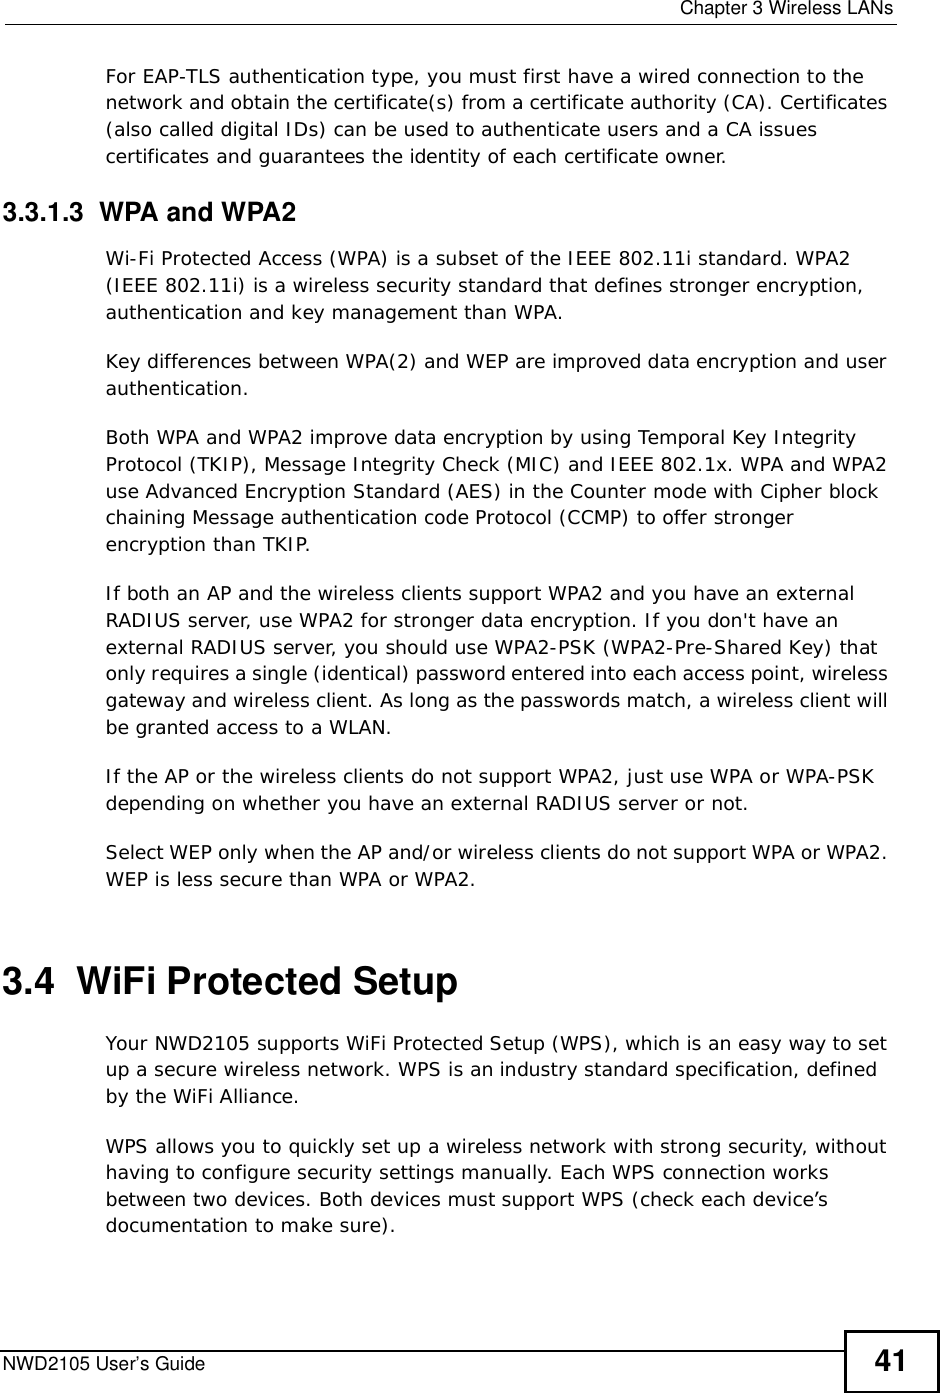  Chapter 3Wireless LANsNWD2105 User’s Guide 41For EAP-TLS authentication type, you must first have a wired connection to the network and obtain the certificate(s) from a certificate authority (CA). Certificates (also called digital IDs) can be used to authenticate users and a CA issues certificates and guarantees the identity of each certificate owner.3.3.1.3  WPA and WPA2 Wi-Fi Protected Access (WPA) is a subset of the IEEE 802.11i standard. WPA2 (IEEE 802.11i) is a wireless security standard that defines stronger encryption, authentication and key management than WPA. Key differences between WPA(2) and WEP are improved data encryption and user authentication.Both WPA and WPA2 improve data encryption by using Temporal Key Integrity Protocol (TKIP), Message Integrity Check (MIC) and IEEE 802.1x. WPA and WPA2 use Advanced Encryption Standard (AES) in the Counter mode with Cipher block chaining Message authentication code Protocol (CCMP) to offer stronger encryption than TKIP.If both an AP and the wireless clients support WPA2 and you have an external RADIUS server, use WPA2 for stronger data encryption. If you don&apos;t have an external RADIUS server, you should use WPA2-PSK (WPA2-Pre-Shared Key) that only requires a single (identical) password entered into each access point, wireless gateway and wireless client. As long as the passwords match, a wireless client will be granted access to a WLAN. If the AP or the wireless clients do not support WPA2, just use WPA or WPA-PSK depending on whether you have an external RADIUS server or not.Select WEP only when the AP and/or wireless clients do not support WPA or WPA2. WEP is less secure than WPA or WPA2.3.4  WiFi Protected SetupYour NWD2105 supports WiFi Protected Setup (WPS), which is an easy way to set up a secure wireless network. WPS is an industry standard specification, defined by the WiFi Alliance.WPS allows you to quickly set up a wireless network with strong security, without having to configure security settings manually. Each WPS connection works between two devices. Both devices must support WPS (check each device’s documentation to make sure). 